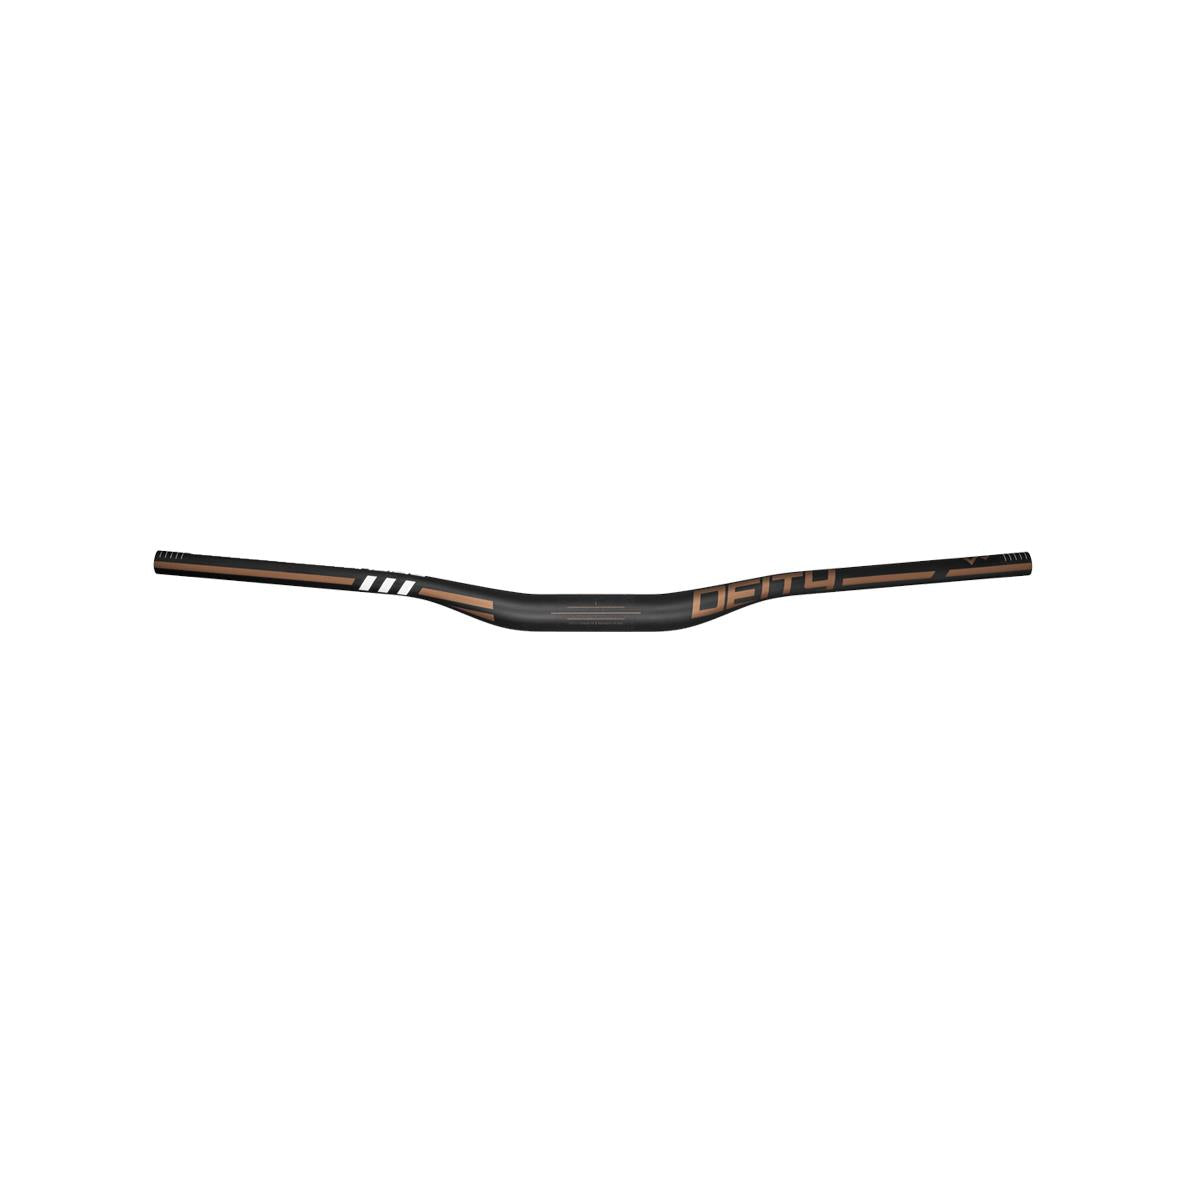 DEITY Skywire Carbon handlebars 35mm bore 25mm rise